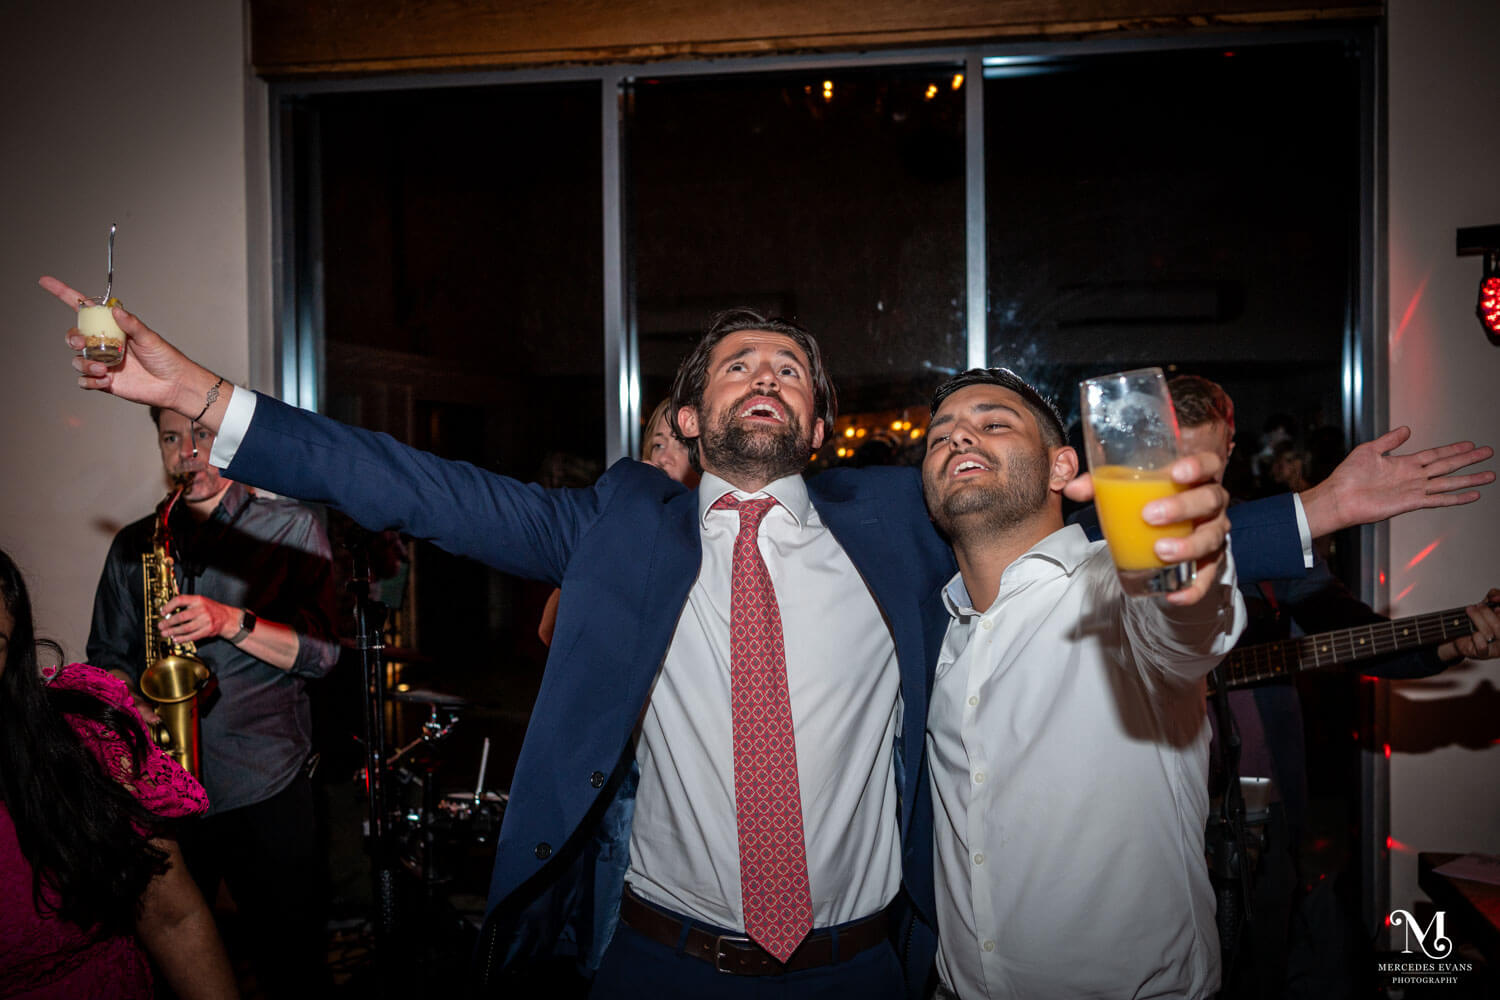 two male guests sing, with drinks and pudding in hand and arms outstretched on the dance floor